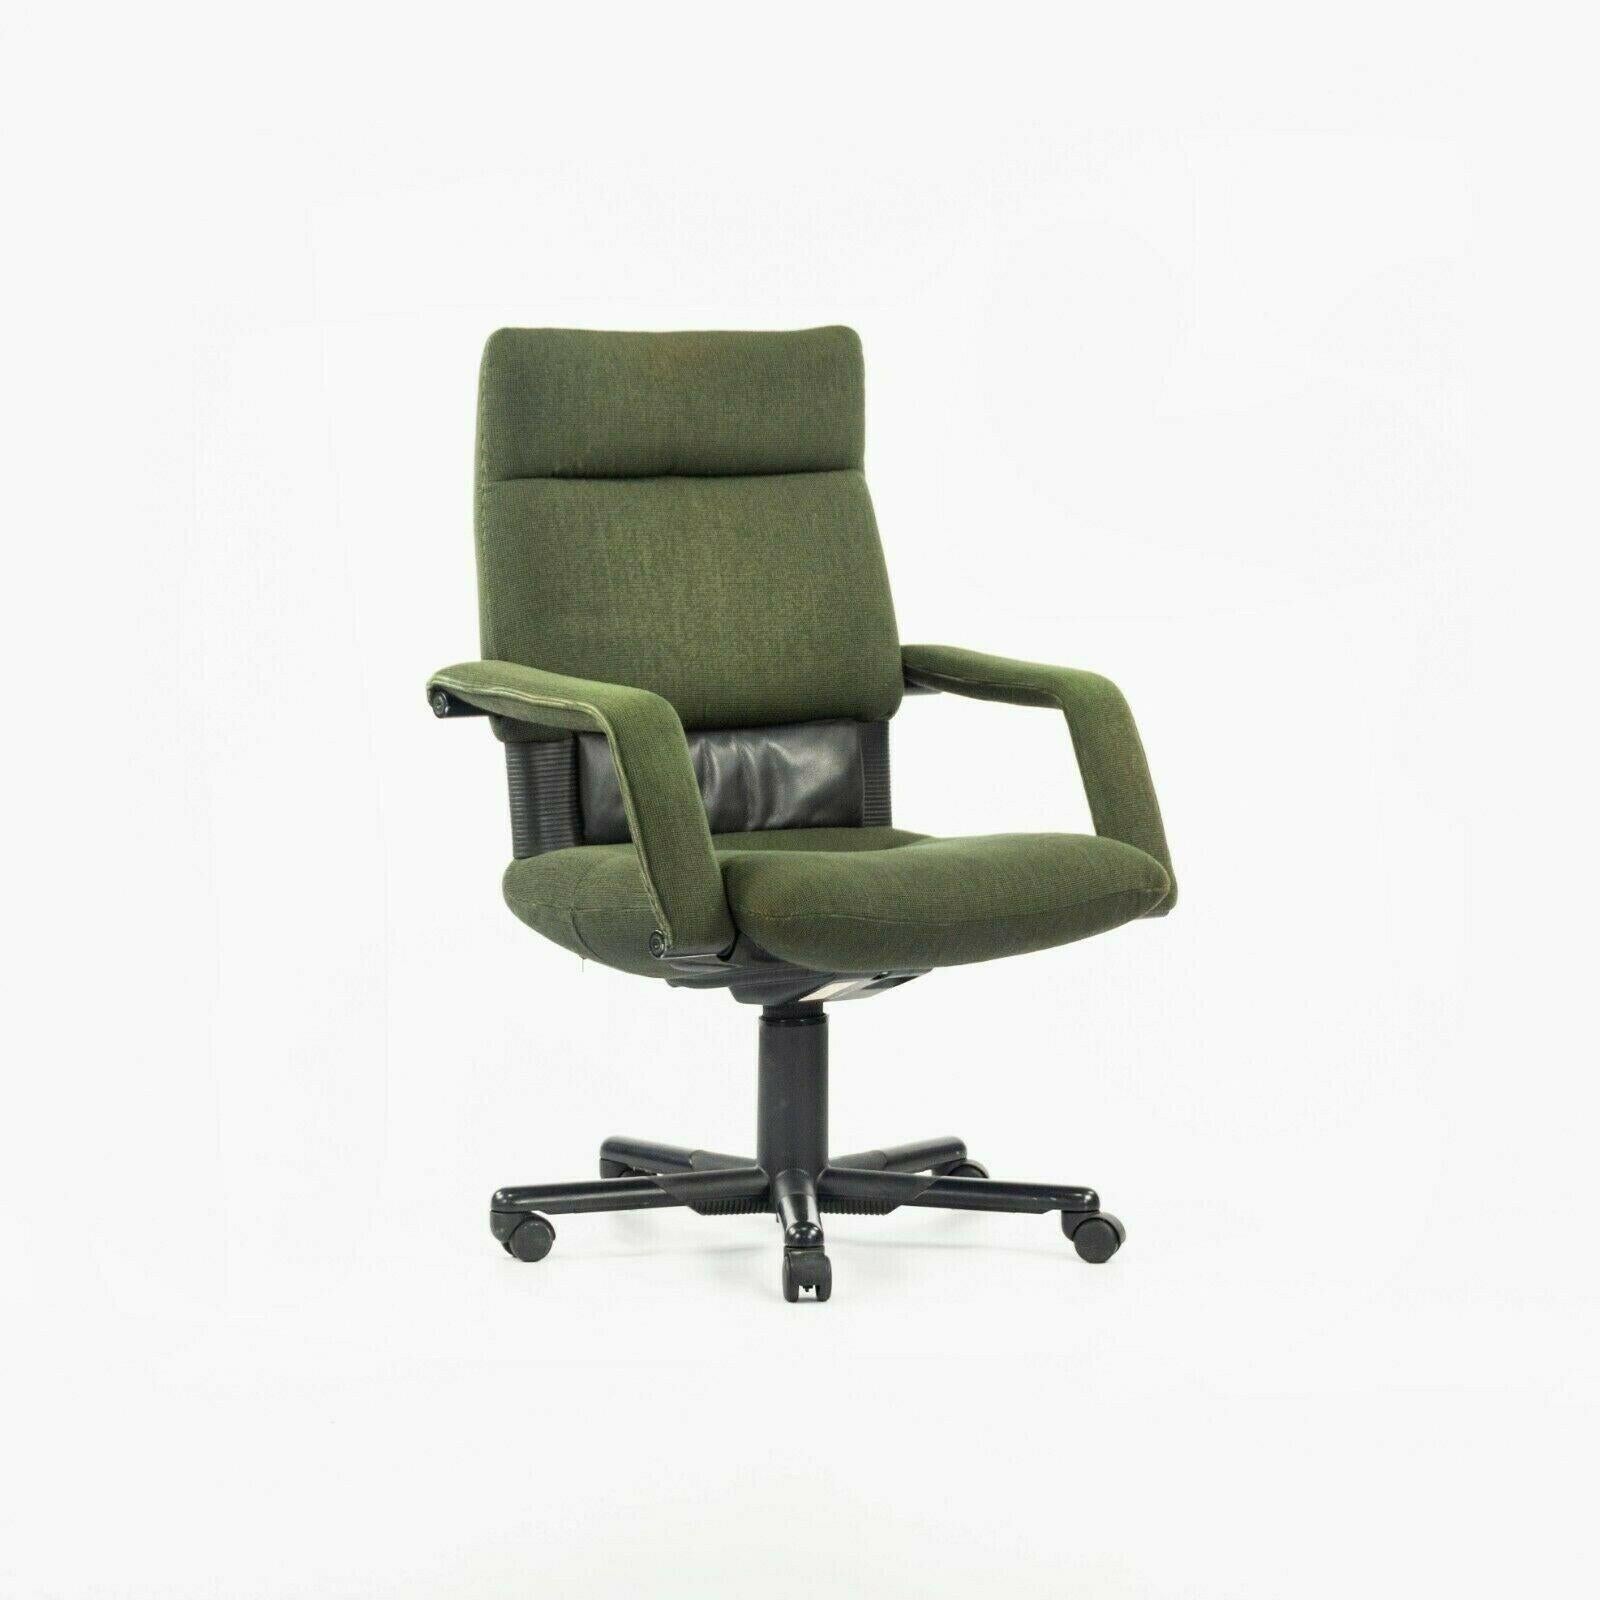 Listed for sale is a single (two are available, but the price is for each chair) vintage 1997 Figura desk chair by Vitra, designed by Mario Bellini. These are gorgeous original examples, which retain their original green fabric upholstery.

They are